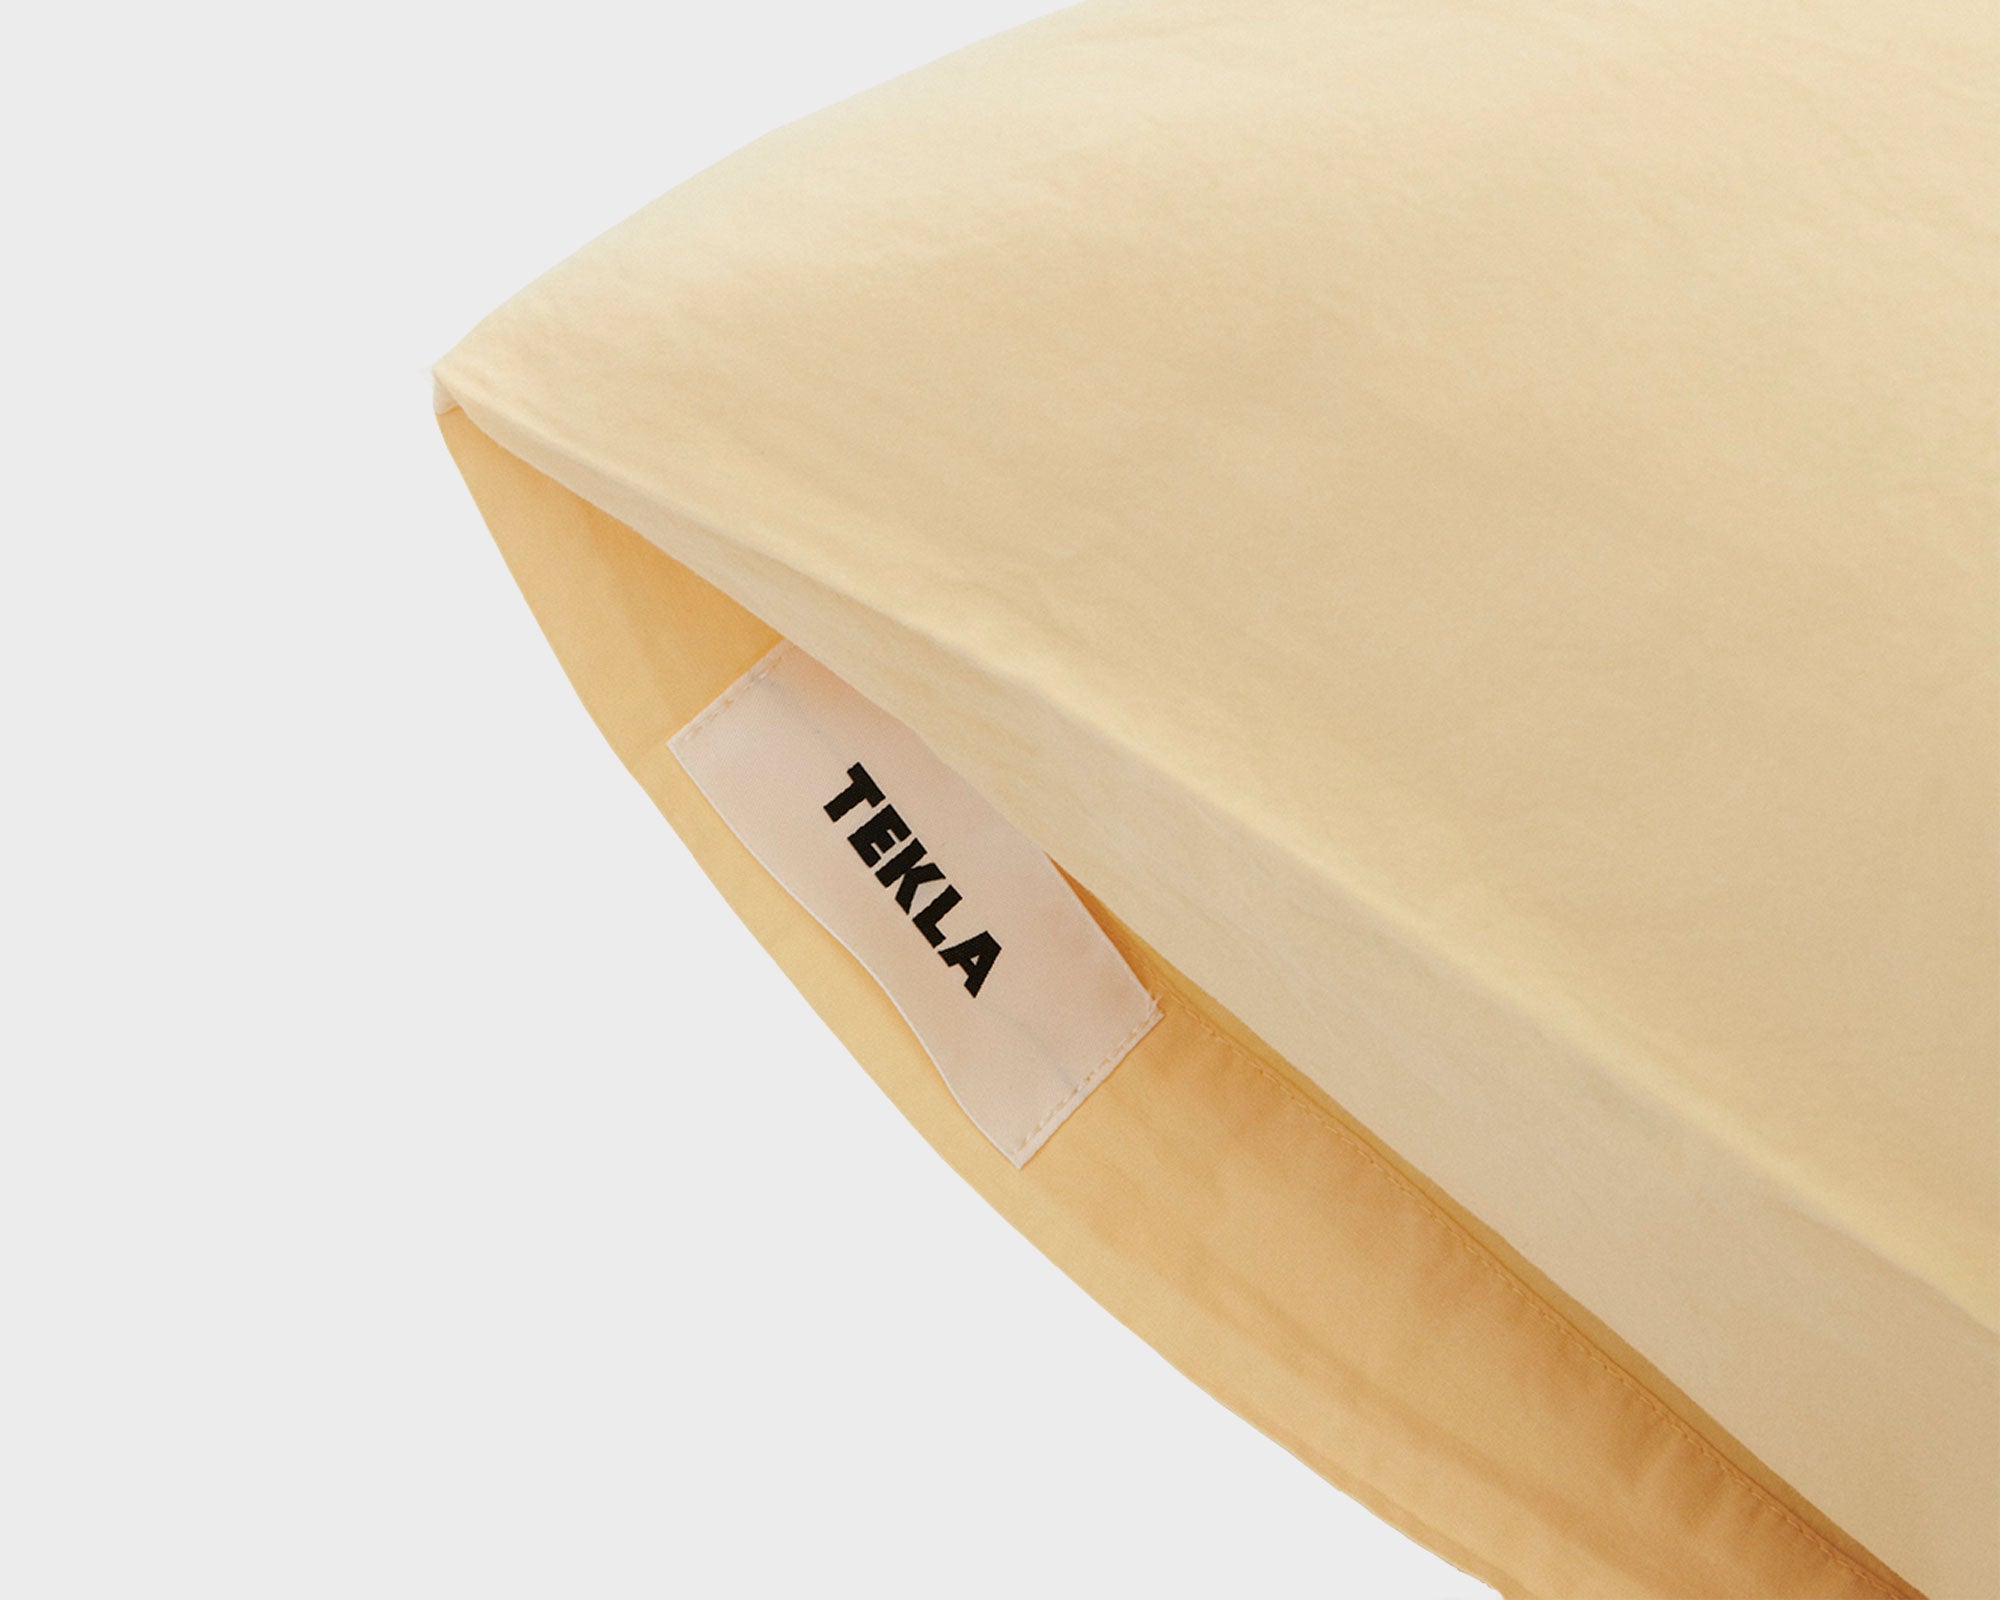 Tekla Cotton Percale Bedding - Shaded Yellow